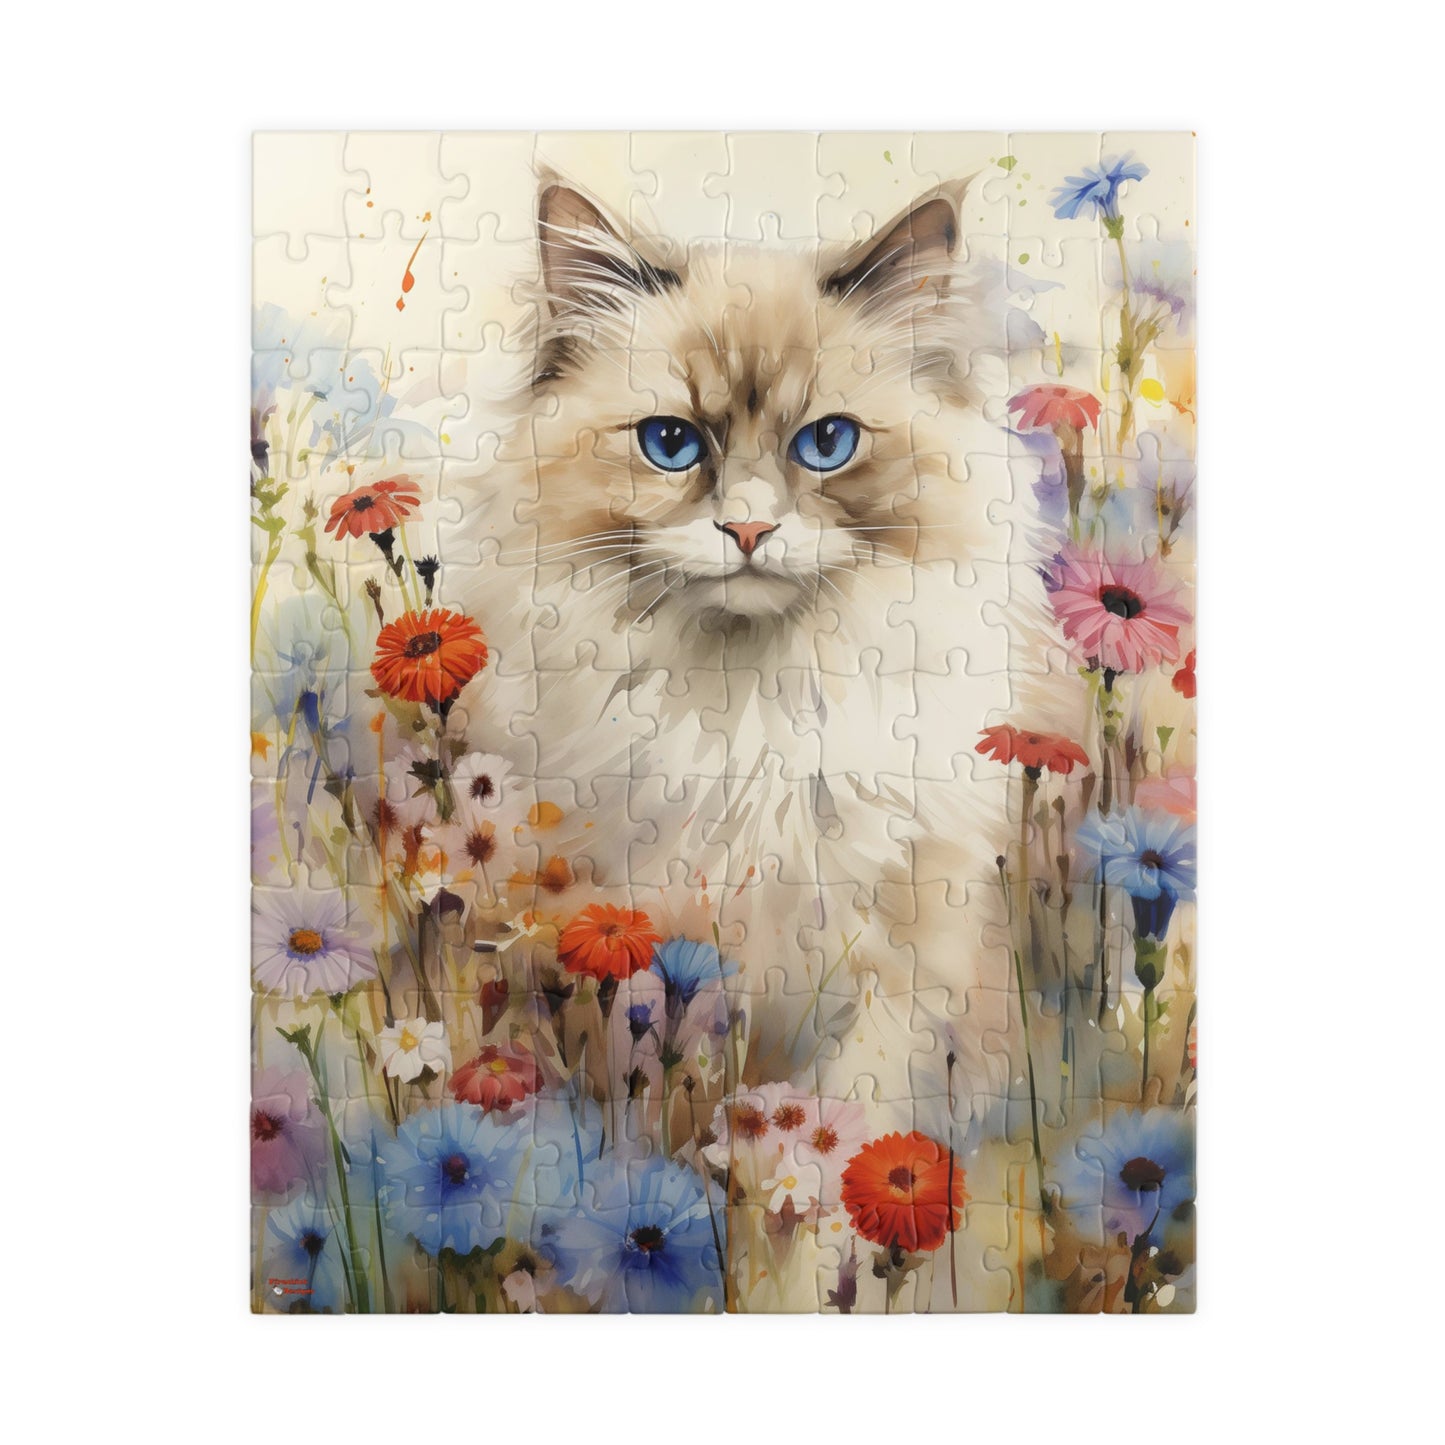 Ragdoll Cat in Wildflowers Watercolor Puzzle, 100% Chipboard, 110-1014 Pieces, Glossy Laminated Finish Feline Pussycat Kitten Family Pet Jig Saw Animals Girls Women Lady